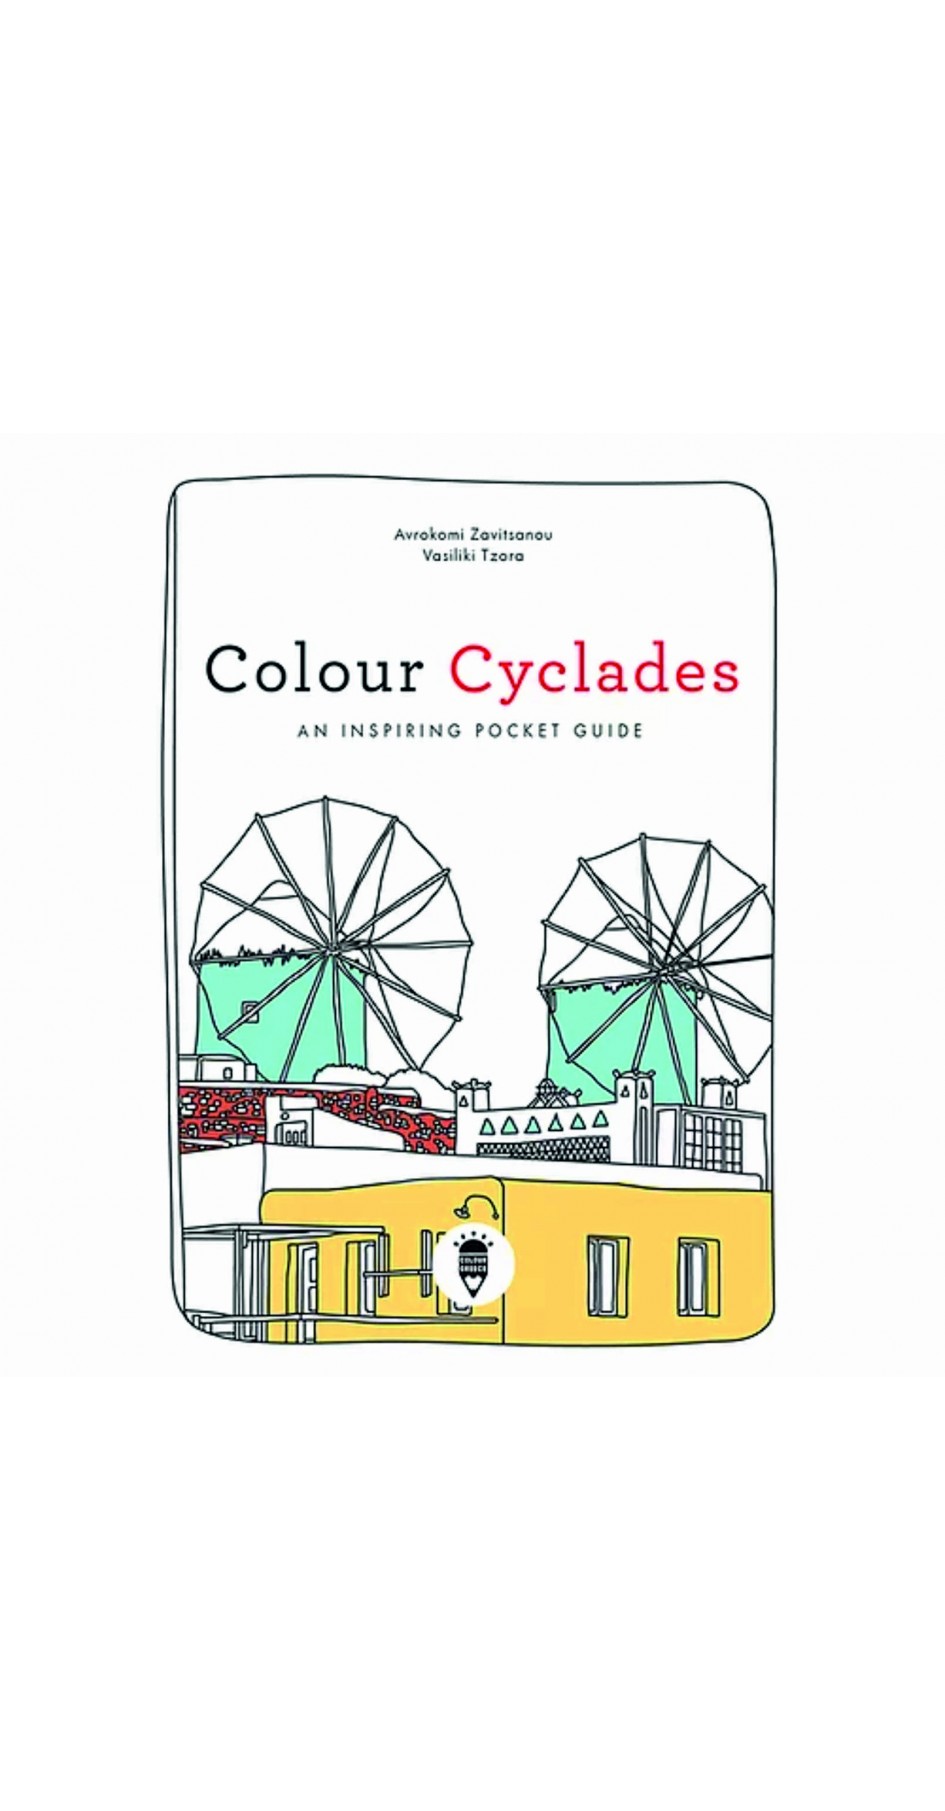 Colour Cyclades - An Inspiring Pocket Guide